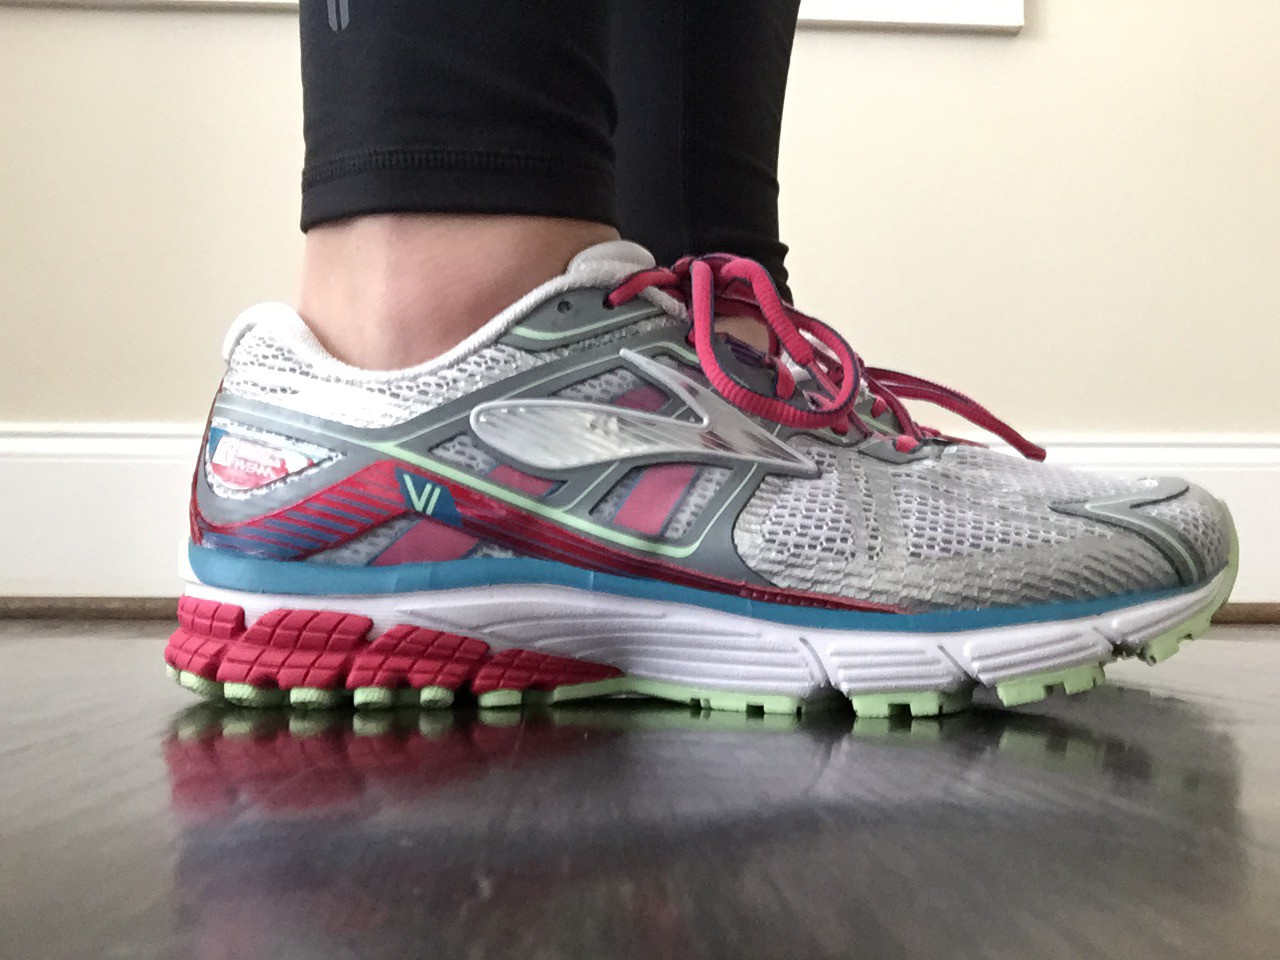 review brooks launch 2